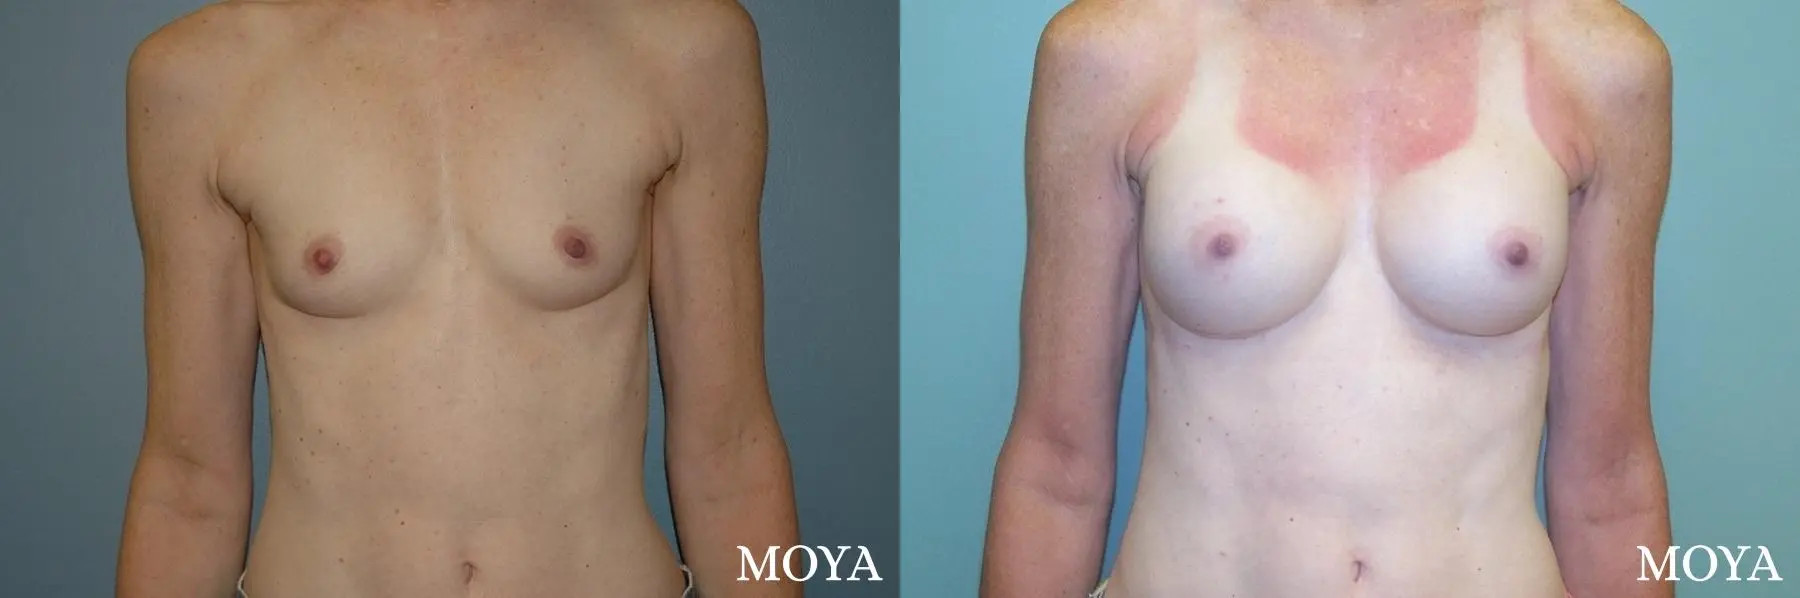 Breast Augmentation: Patient 12 - Before and After 1